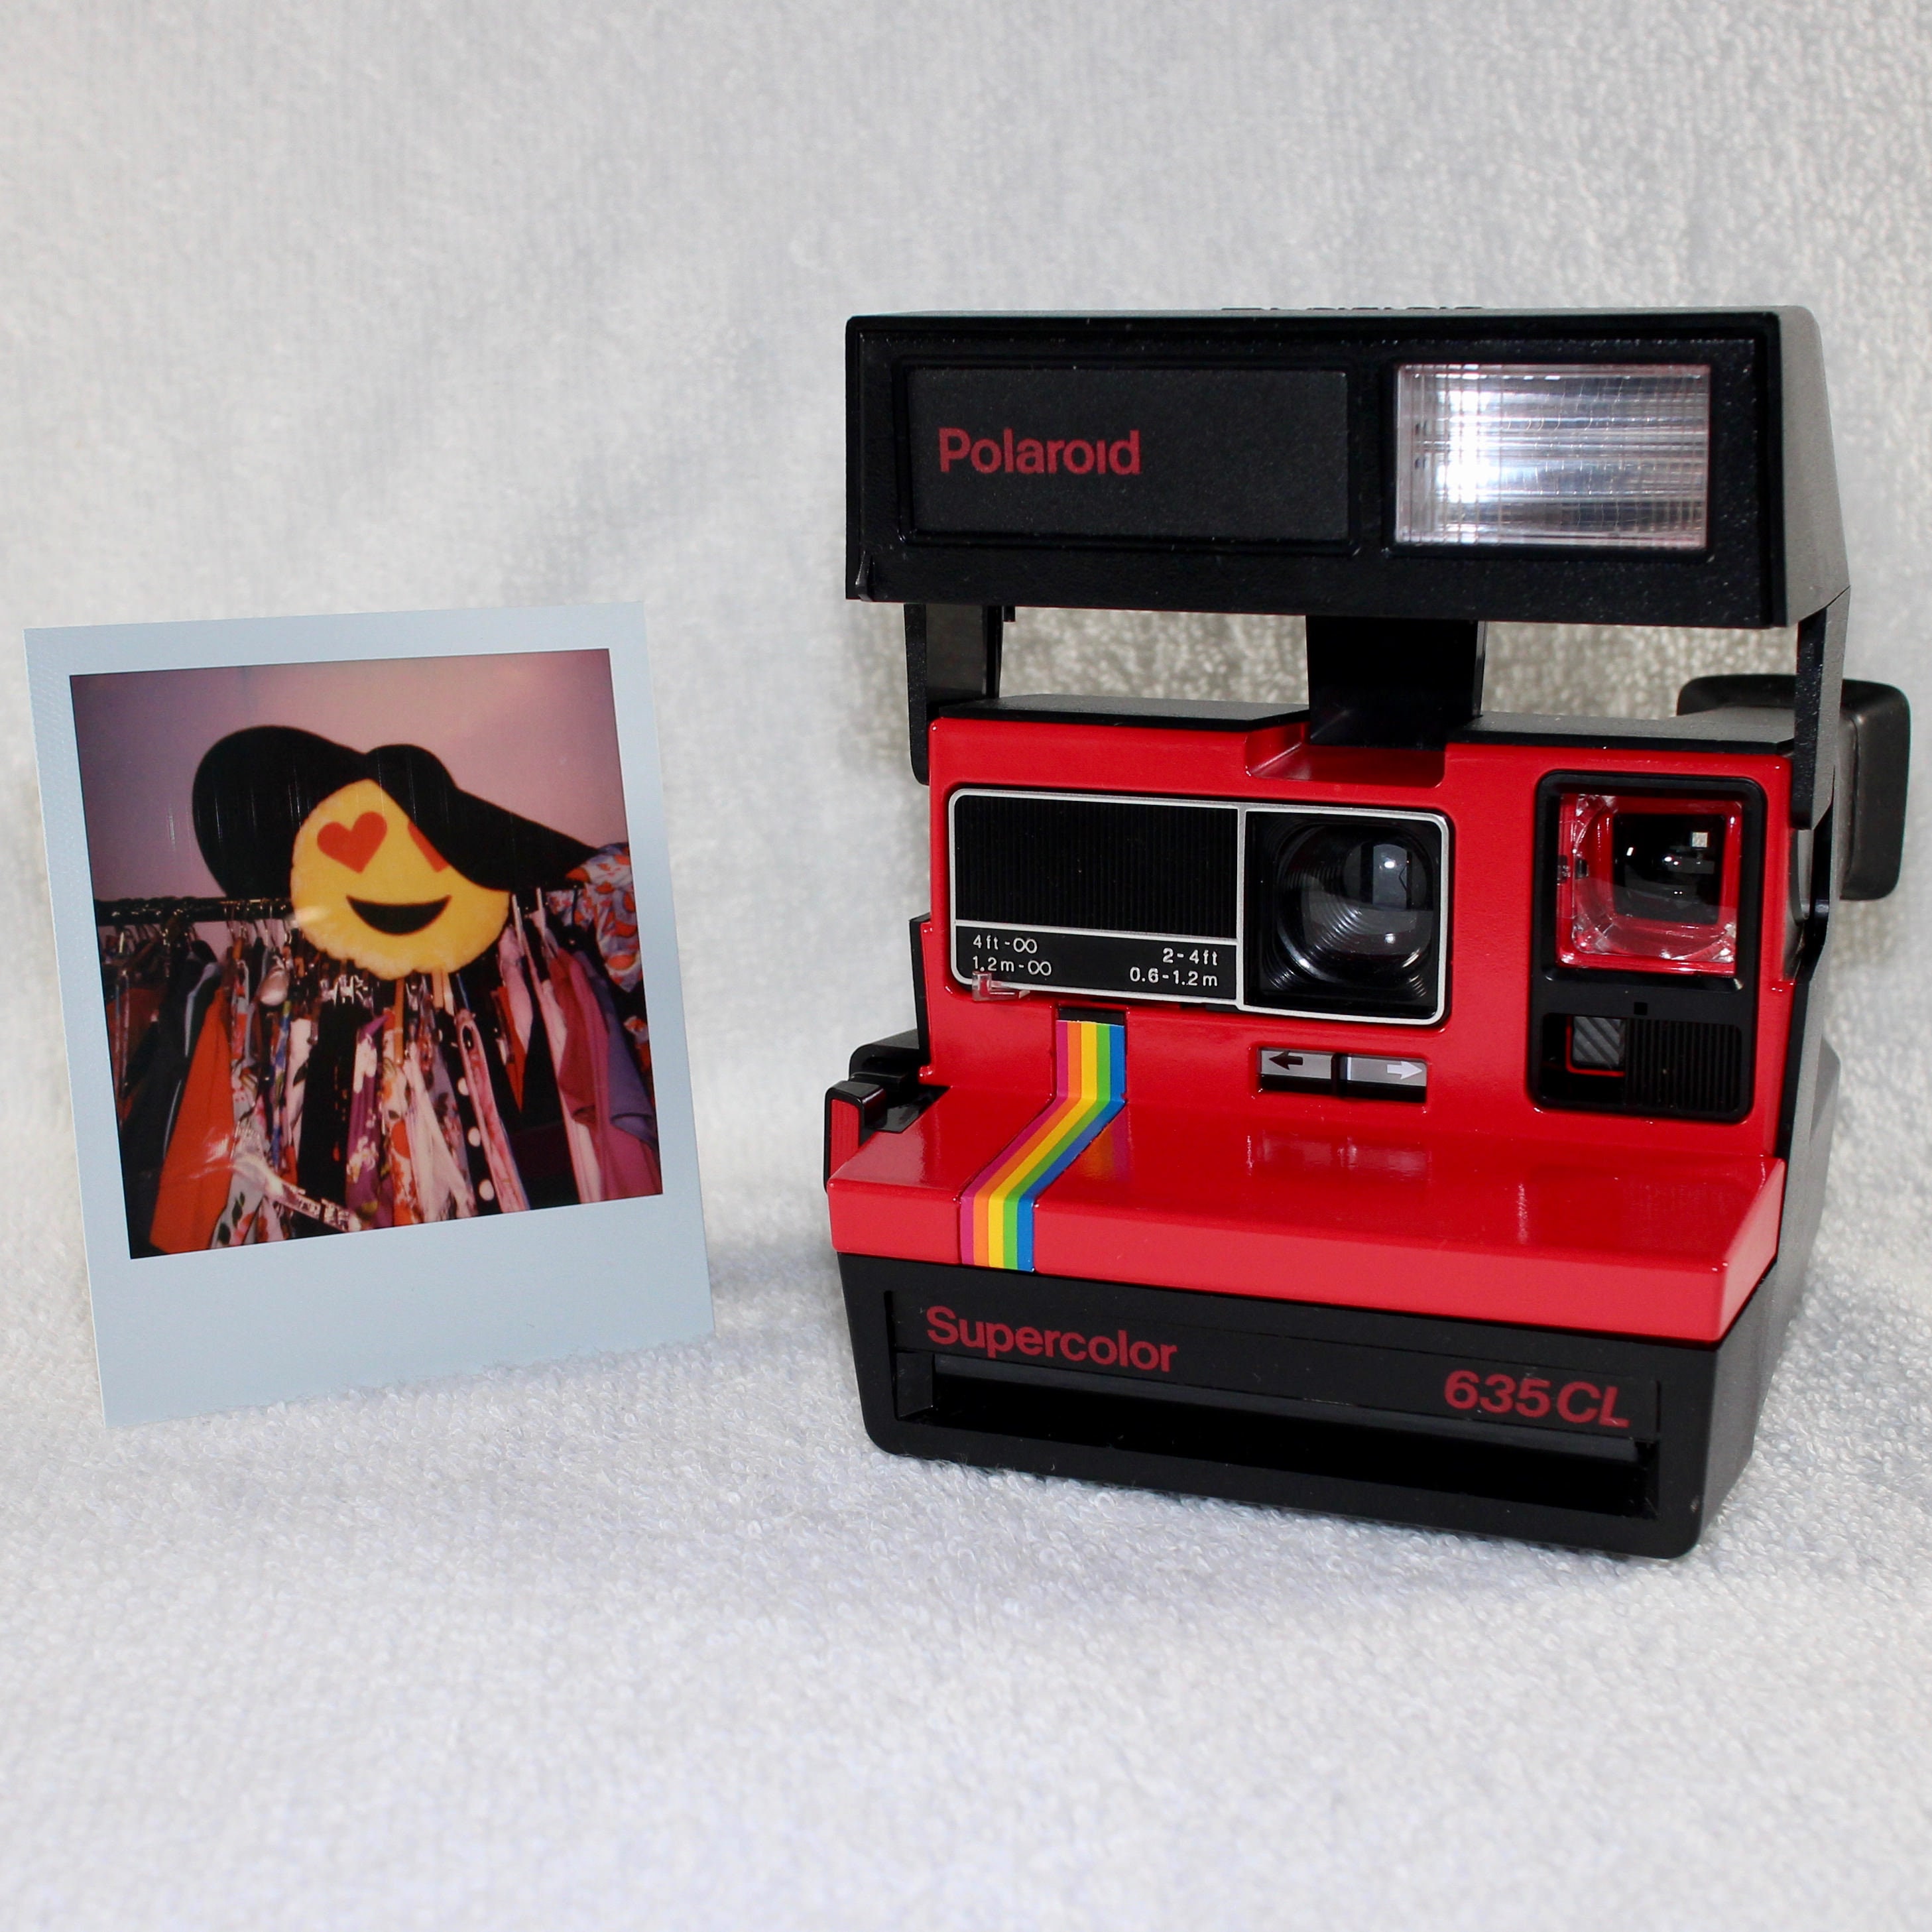 Upcycled Red Rainbow Polaroid Supercolor 635CL With CloseUp